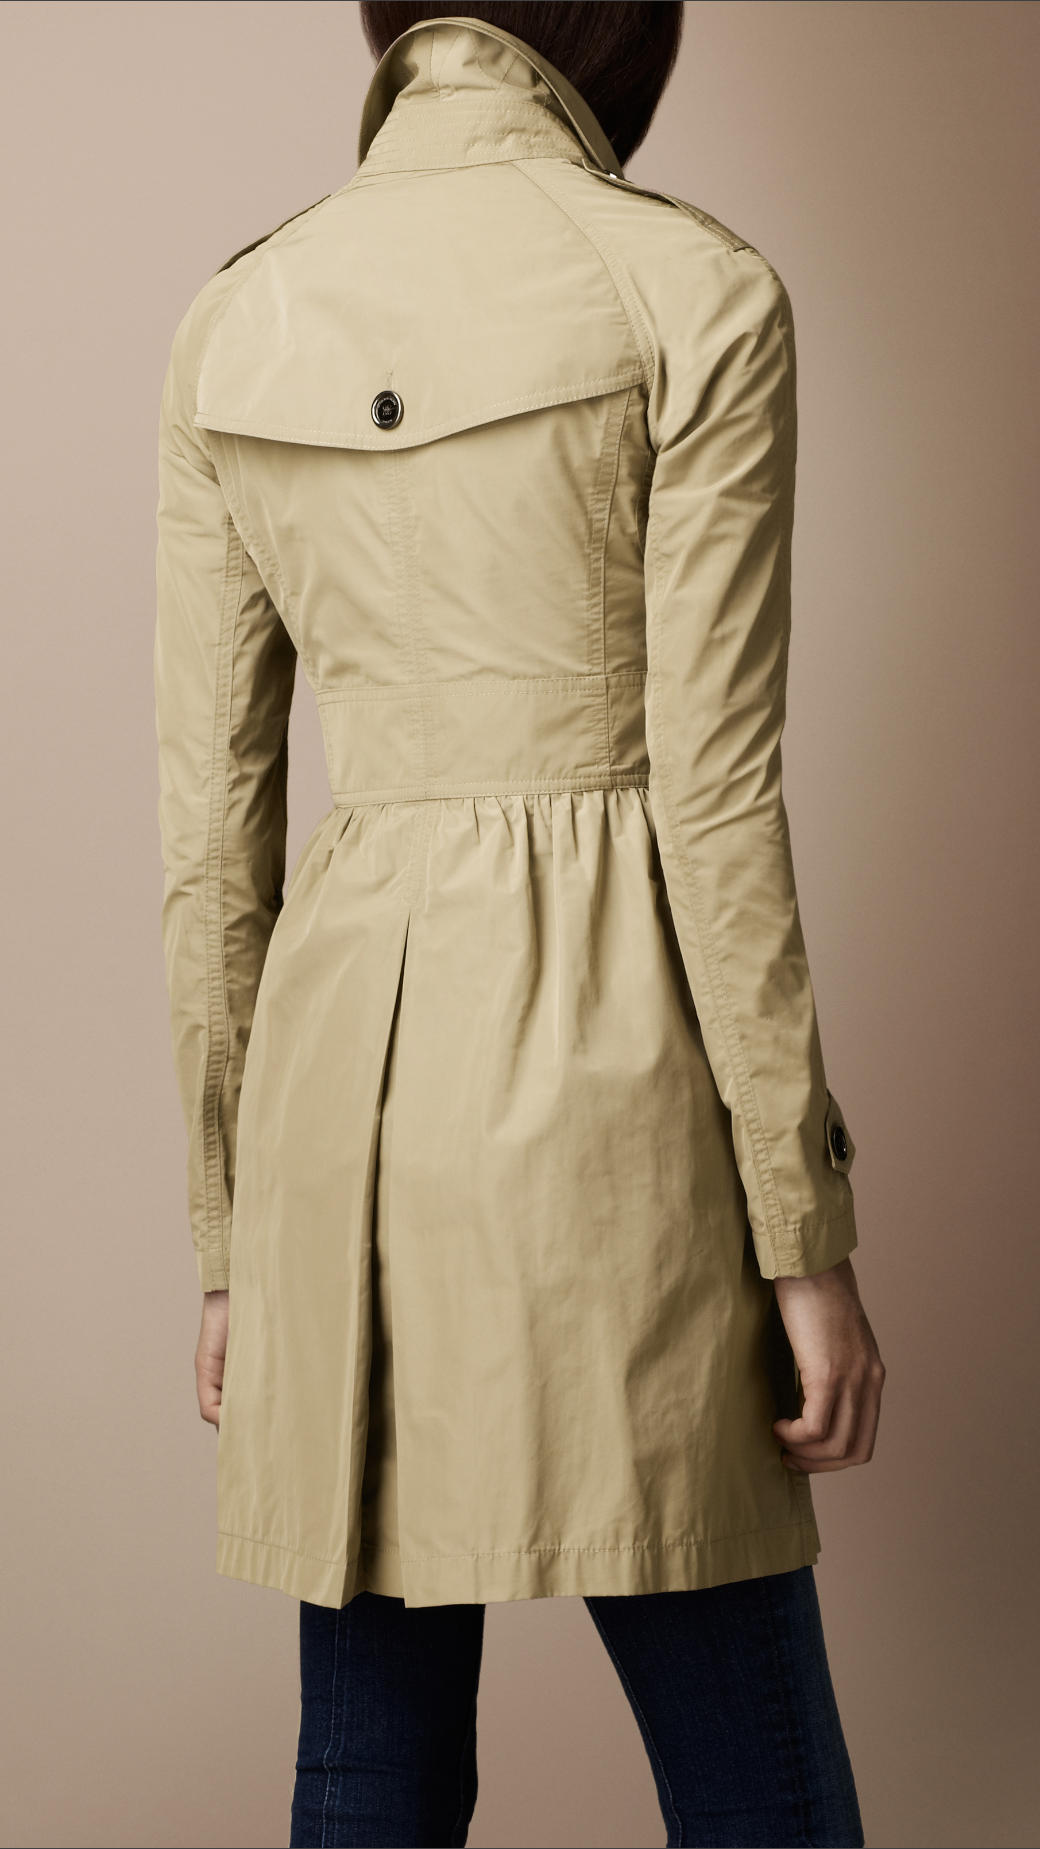 Burberry Brit Midlength Gathered Skirt Trench Coat in Natural - Lyst